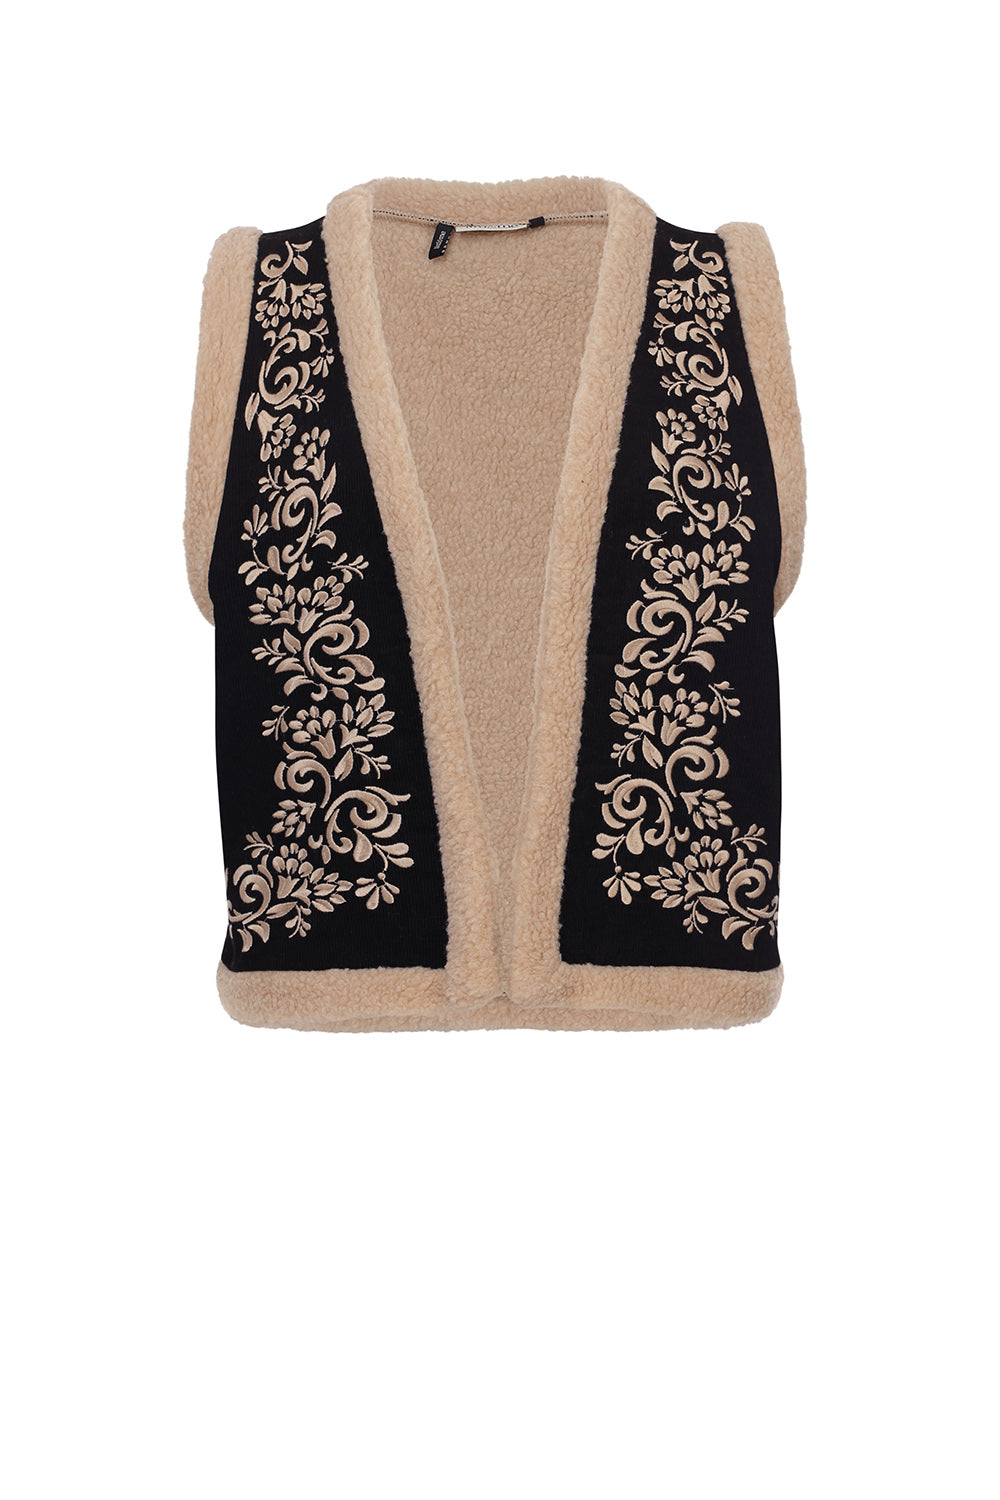 LOOXS Little & Me Embroidery Gilet